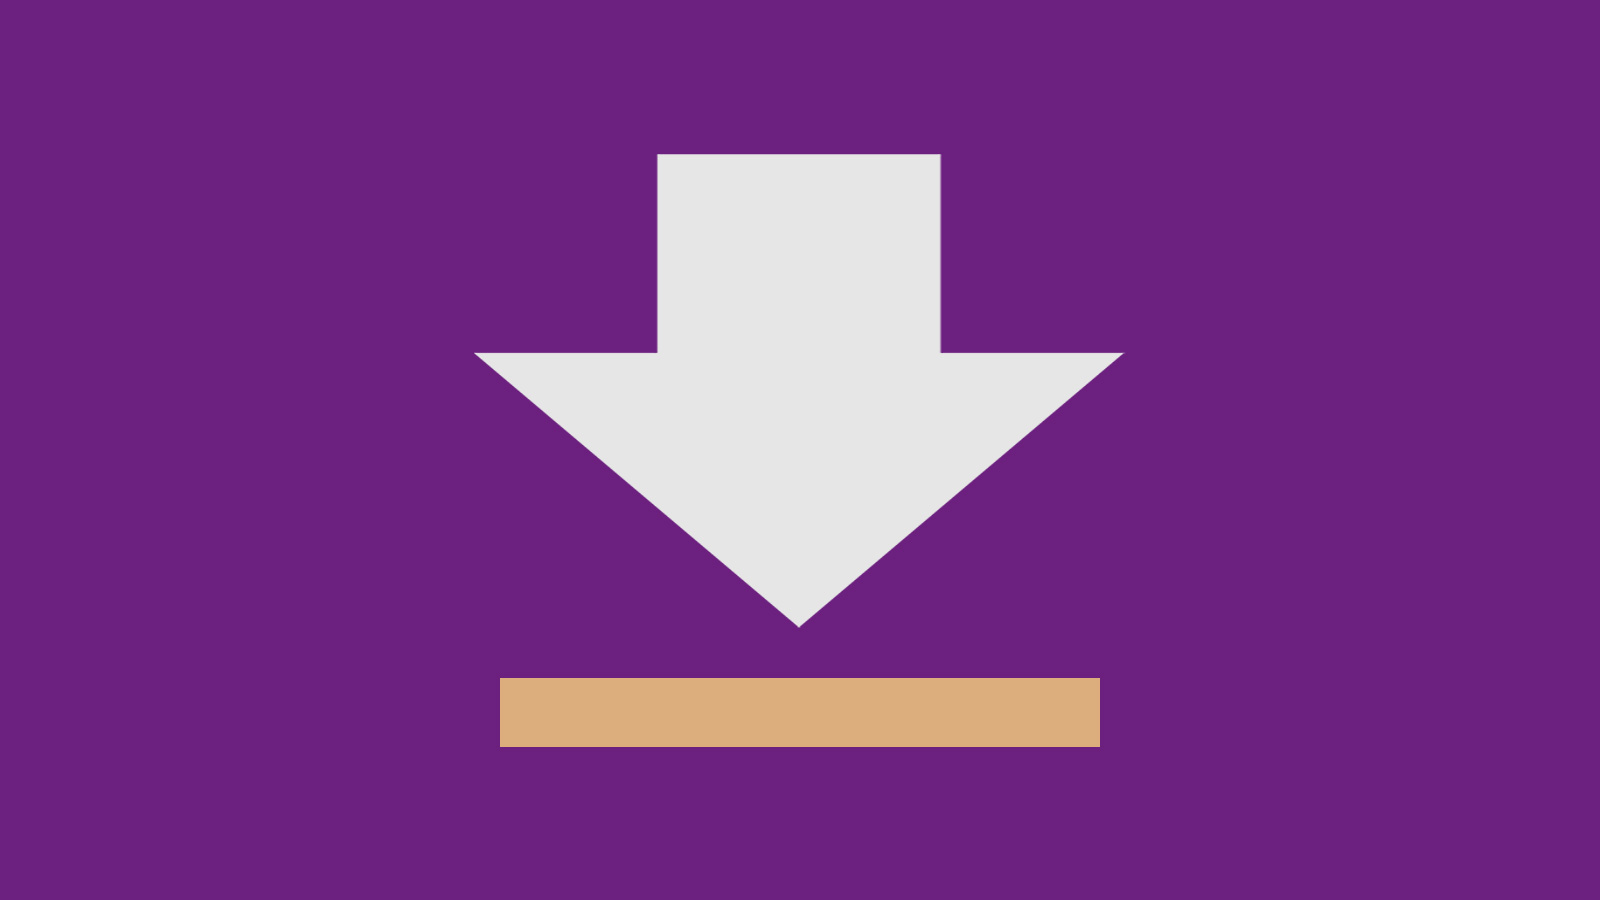 A downwards arrow representing a download.